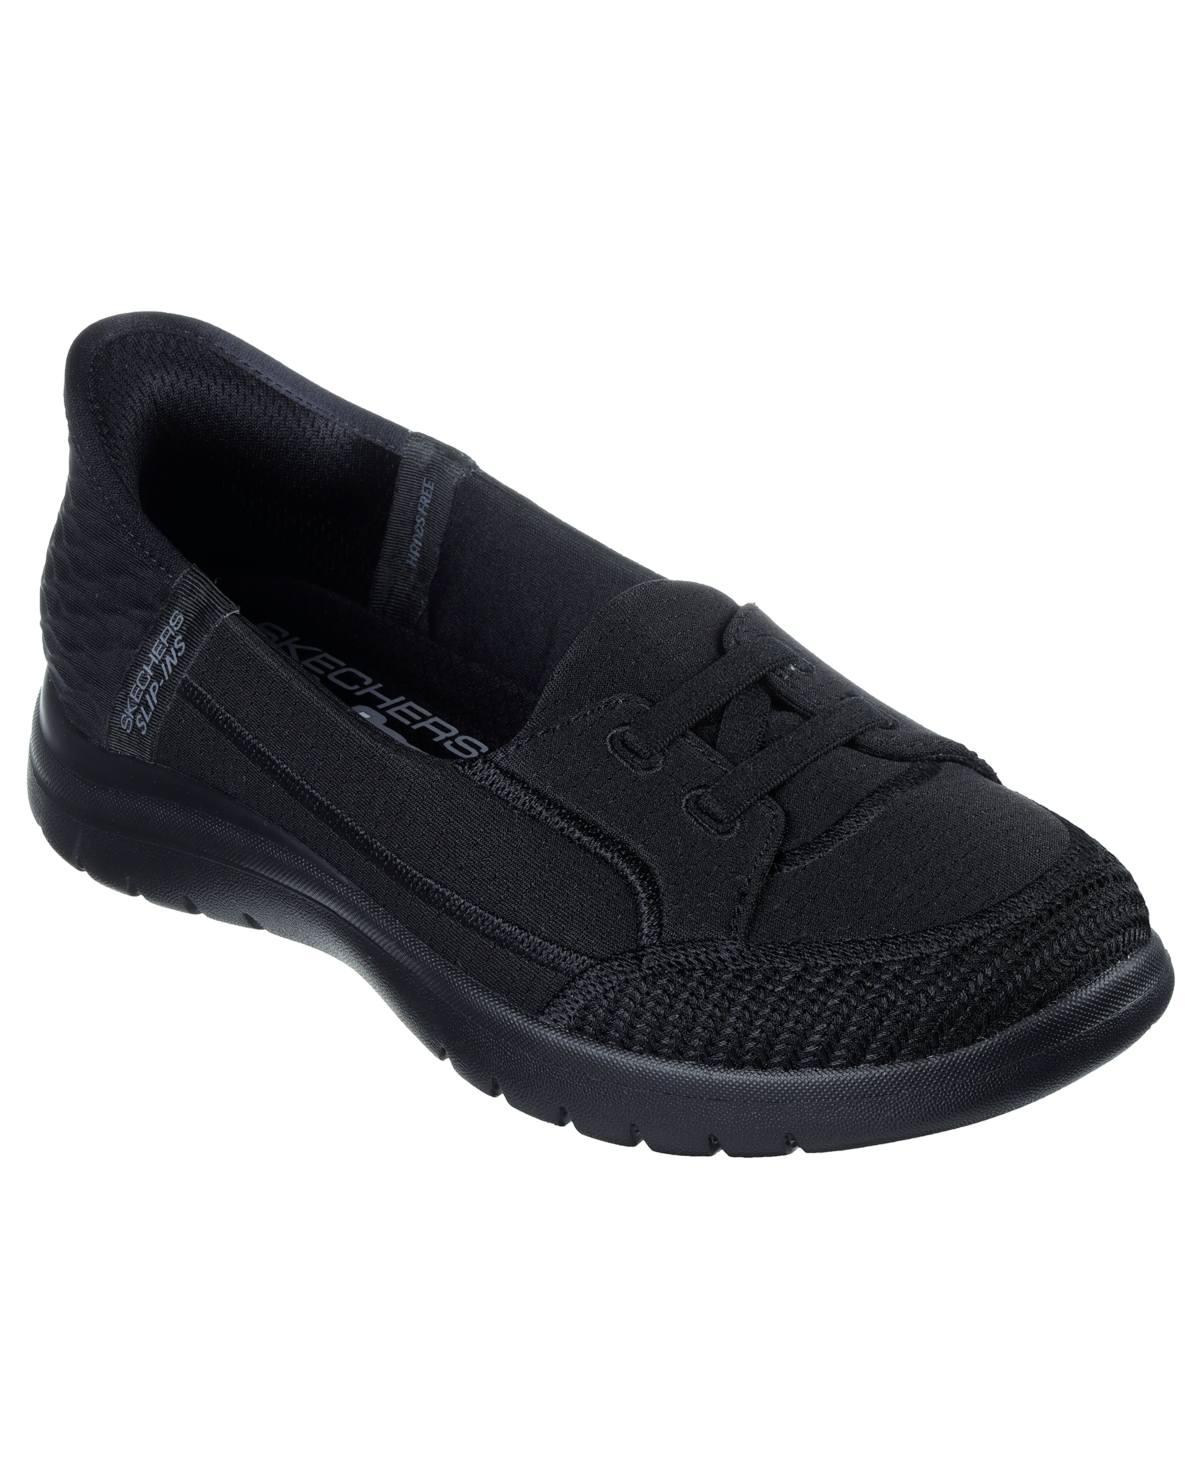 Women's Slip-Ins- Ultra Flex 3.0 - Smooth Step Slip-On Walking Sneakers  from Finish Line